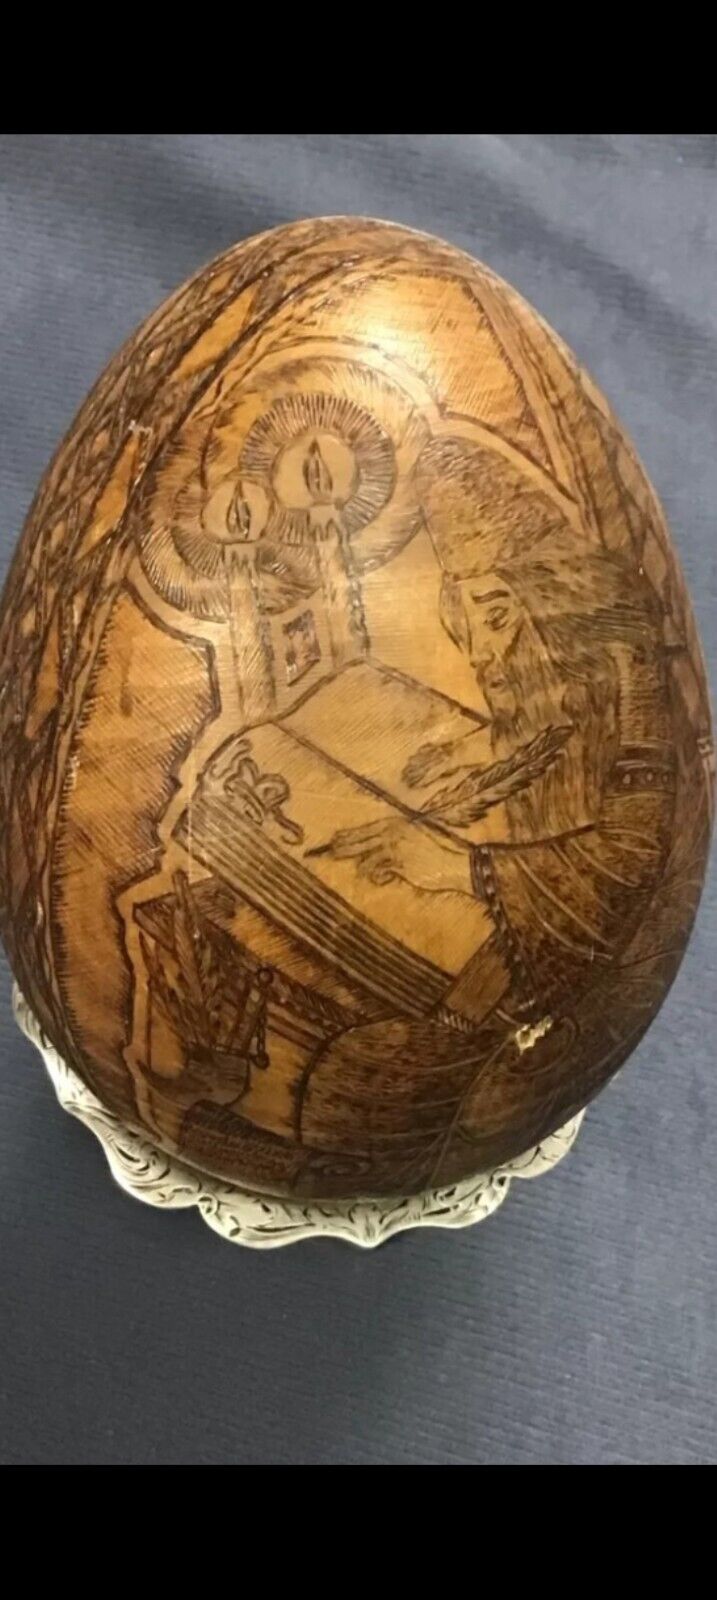 Vintage Russian Christianity Wood Carved Egg double-headed Eagle antique 1900s